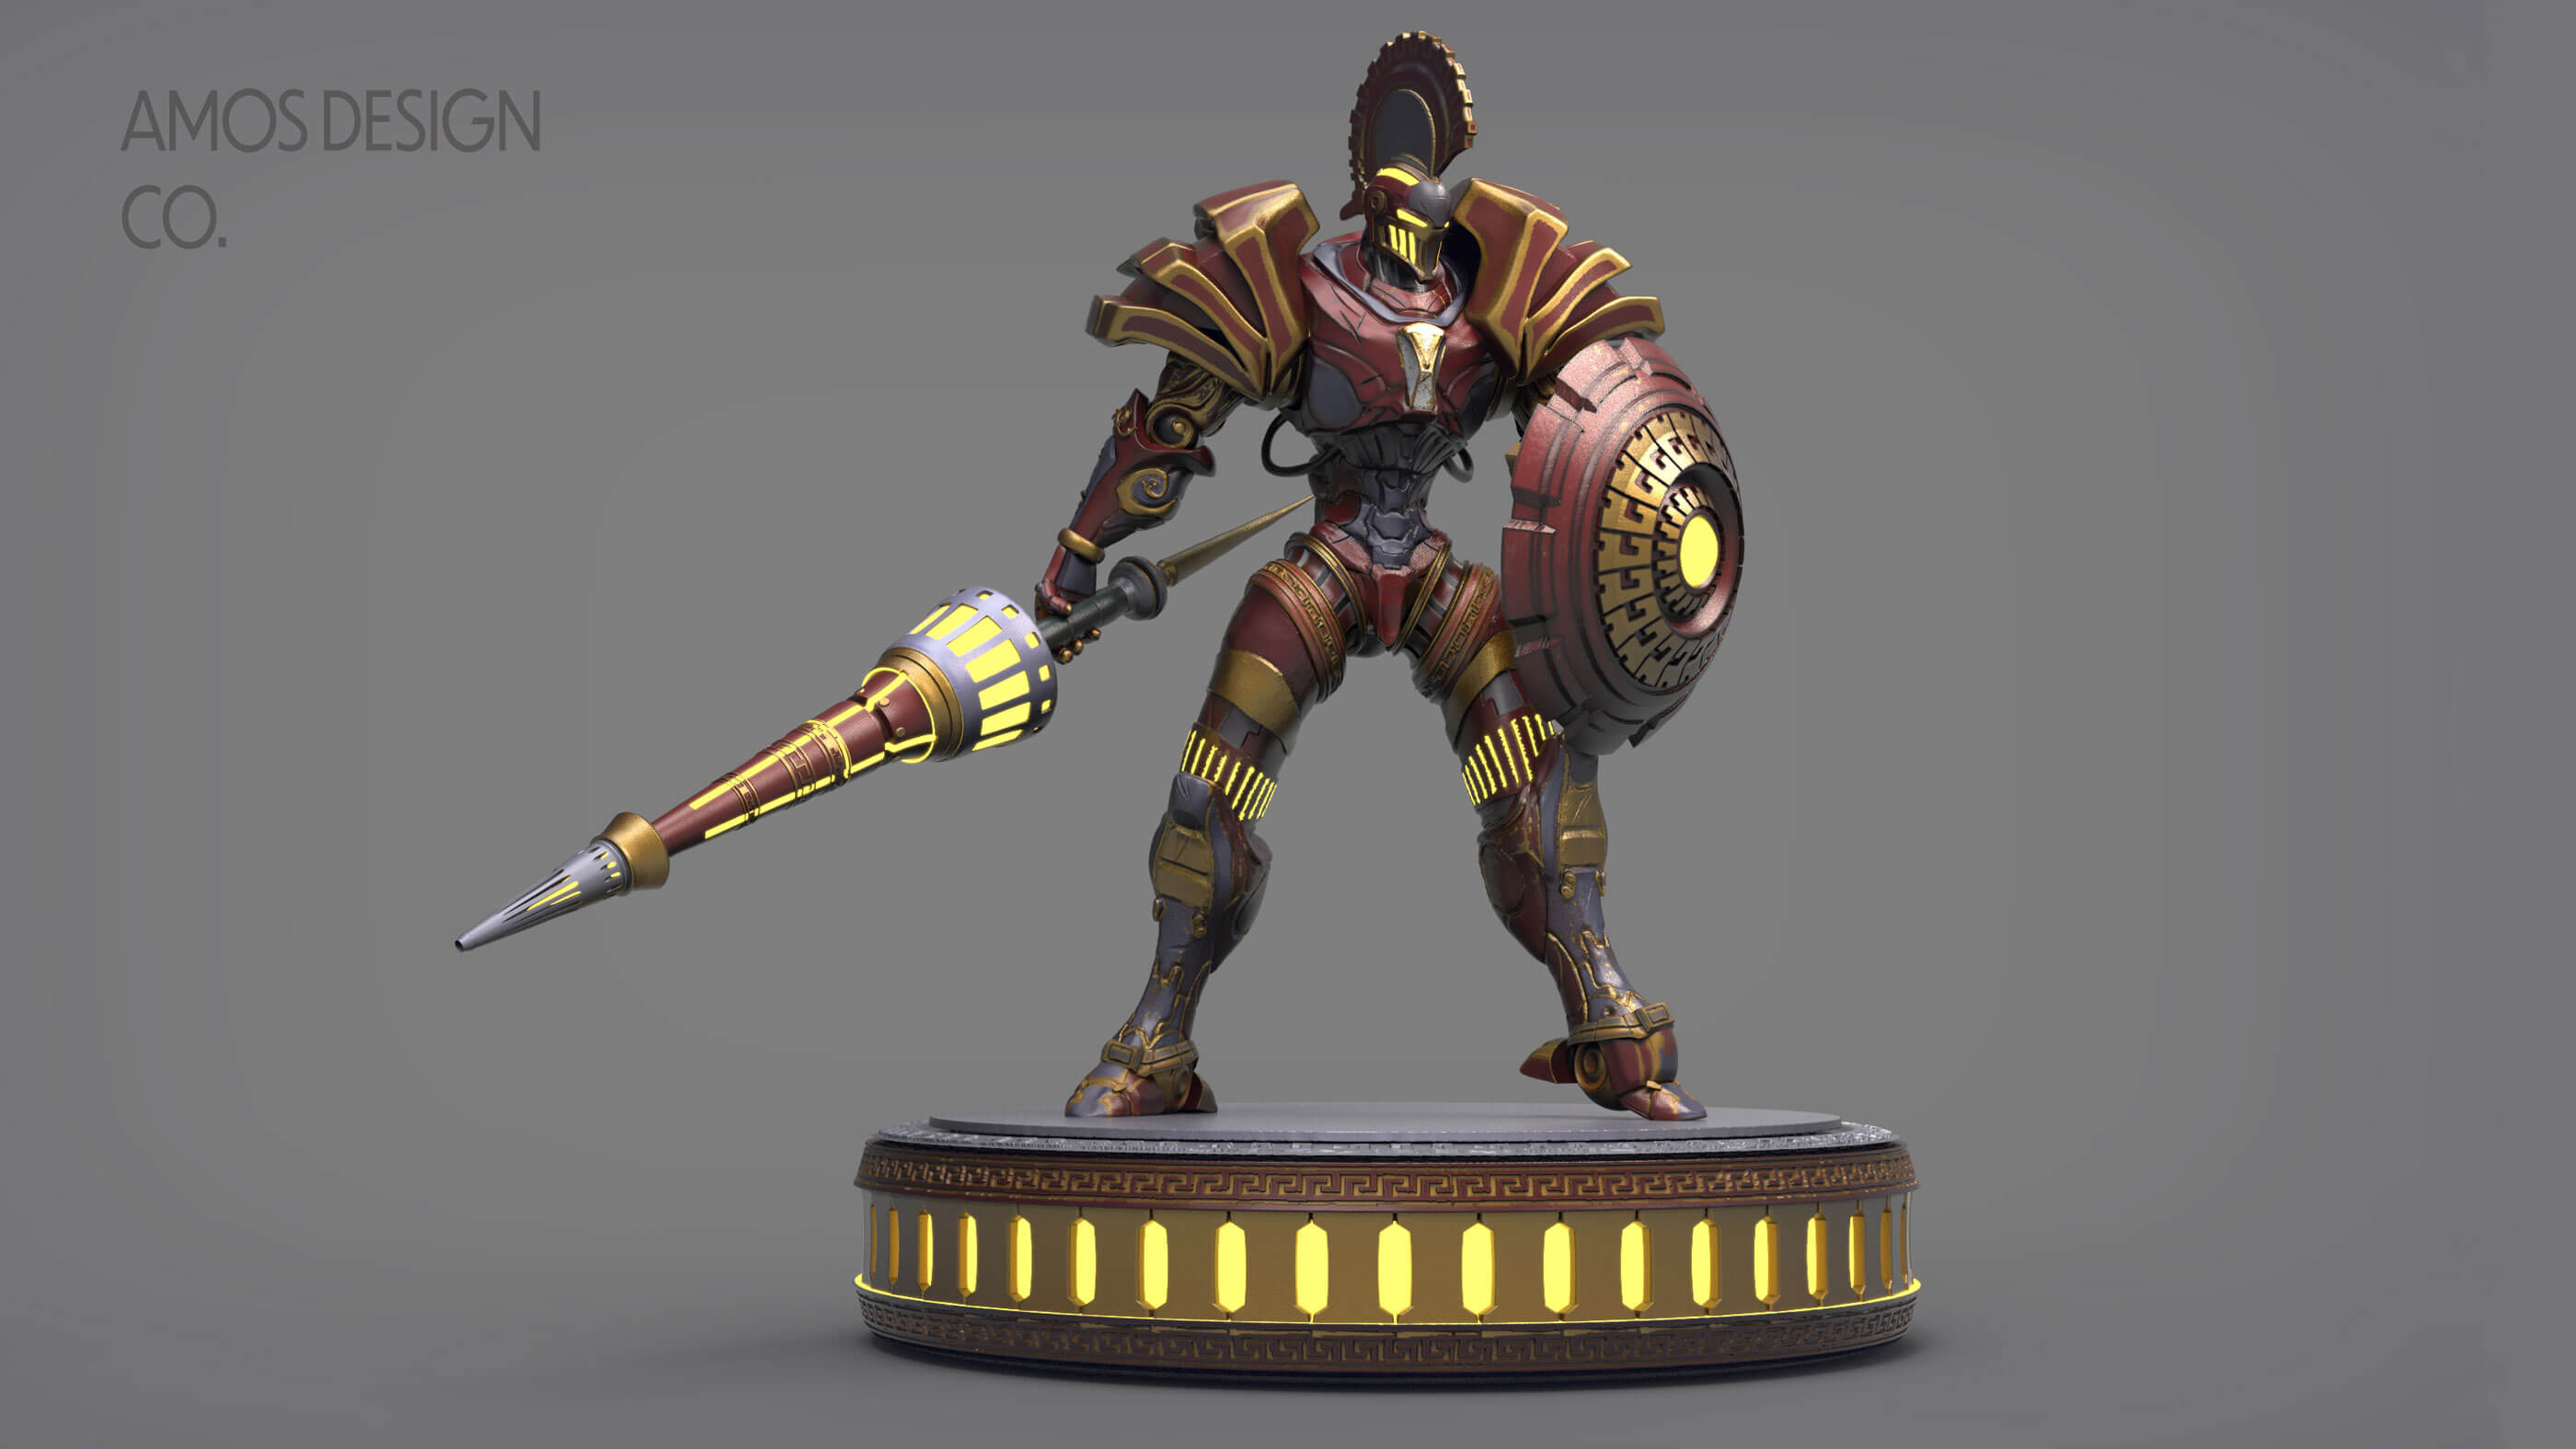 3D model of a robotic warrior with a lance and shield.